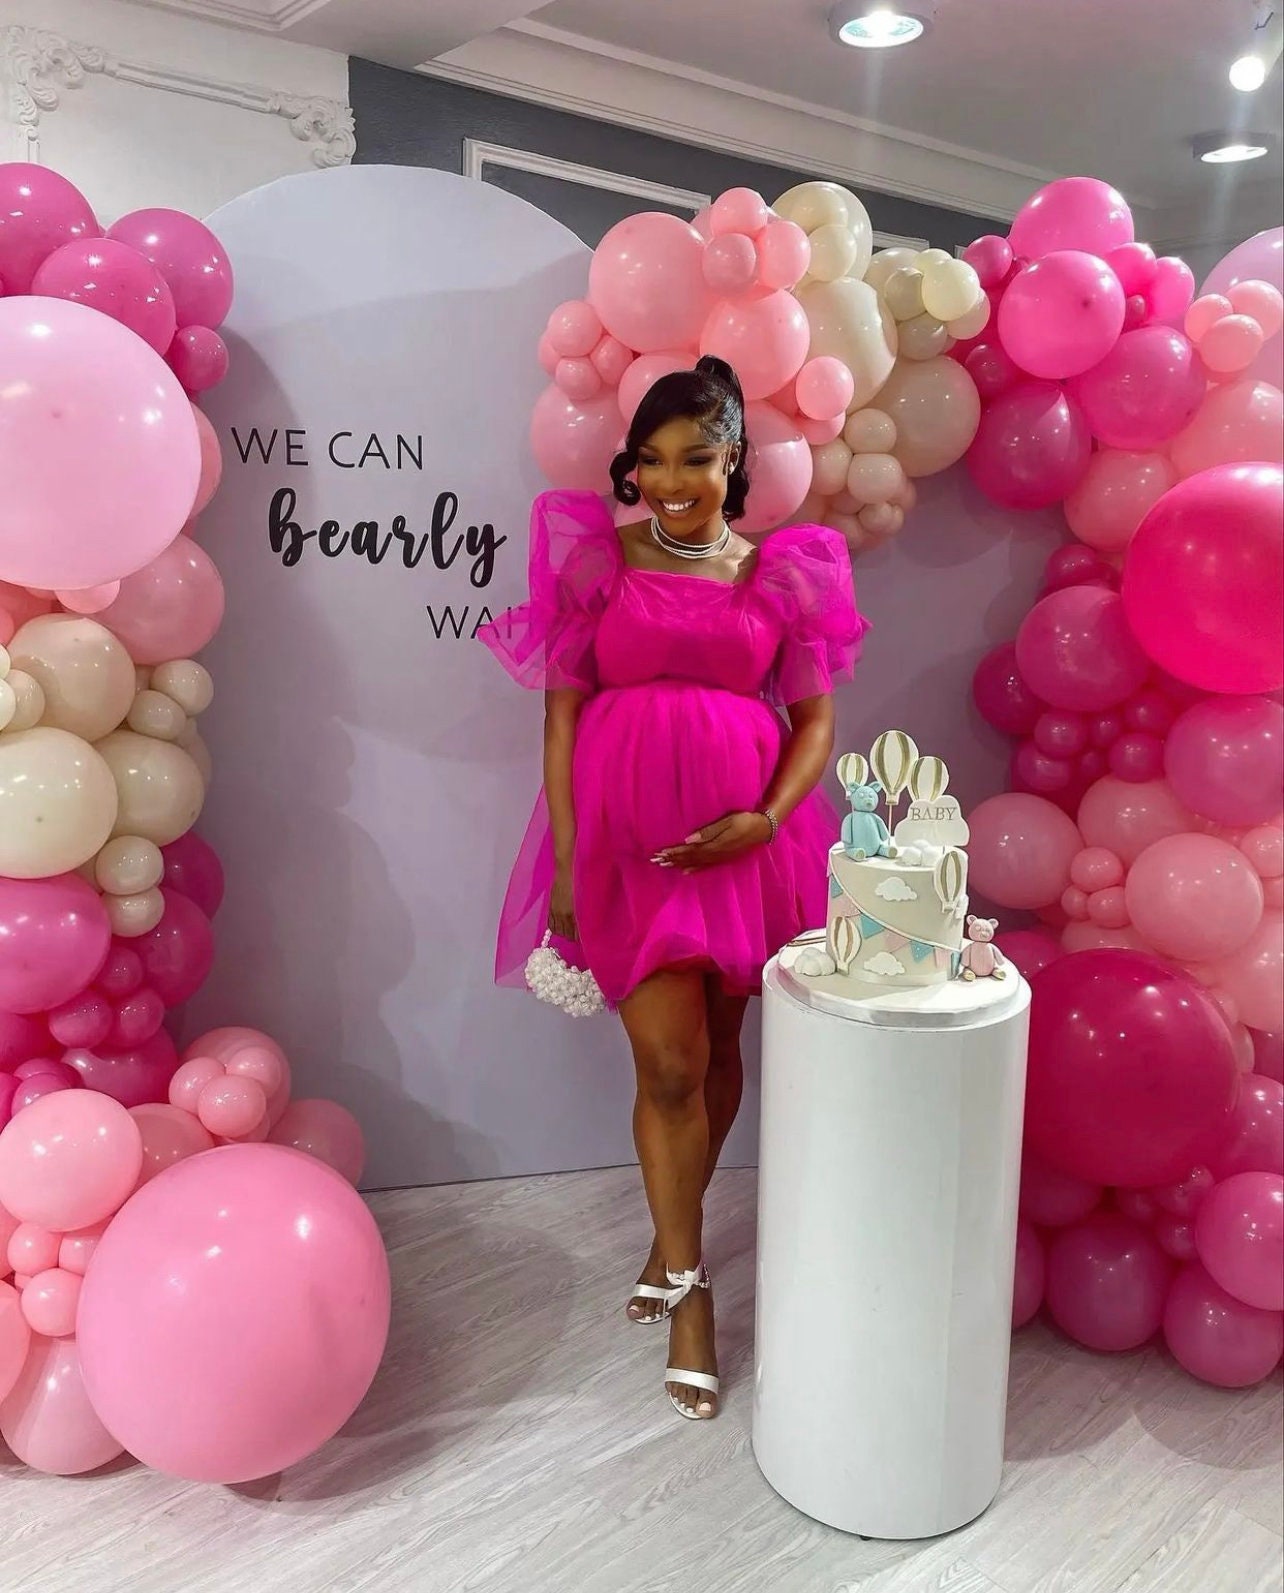 17 Baby Shower Dress Ideas for Moms-to-Be for Every Occasion